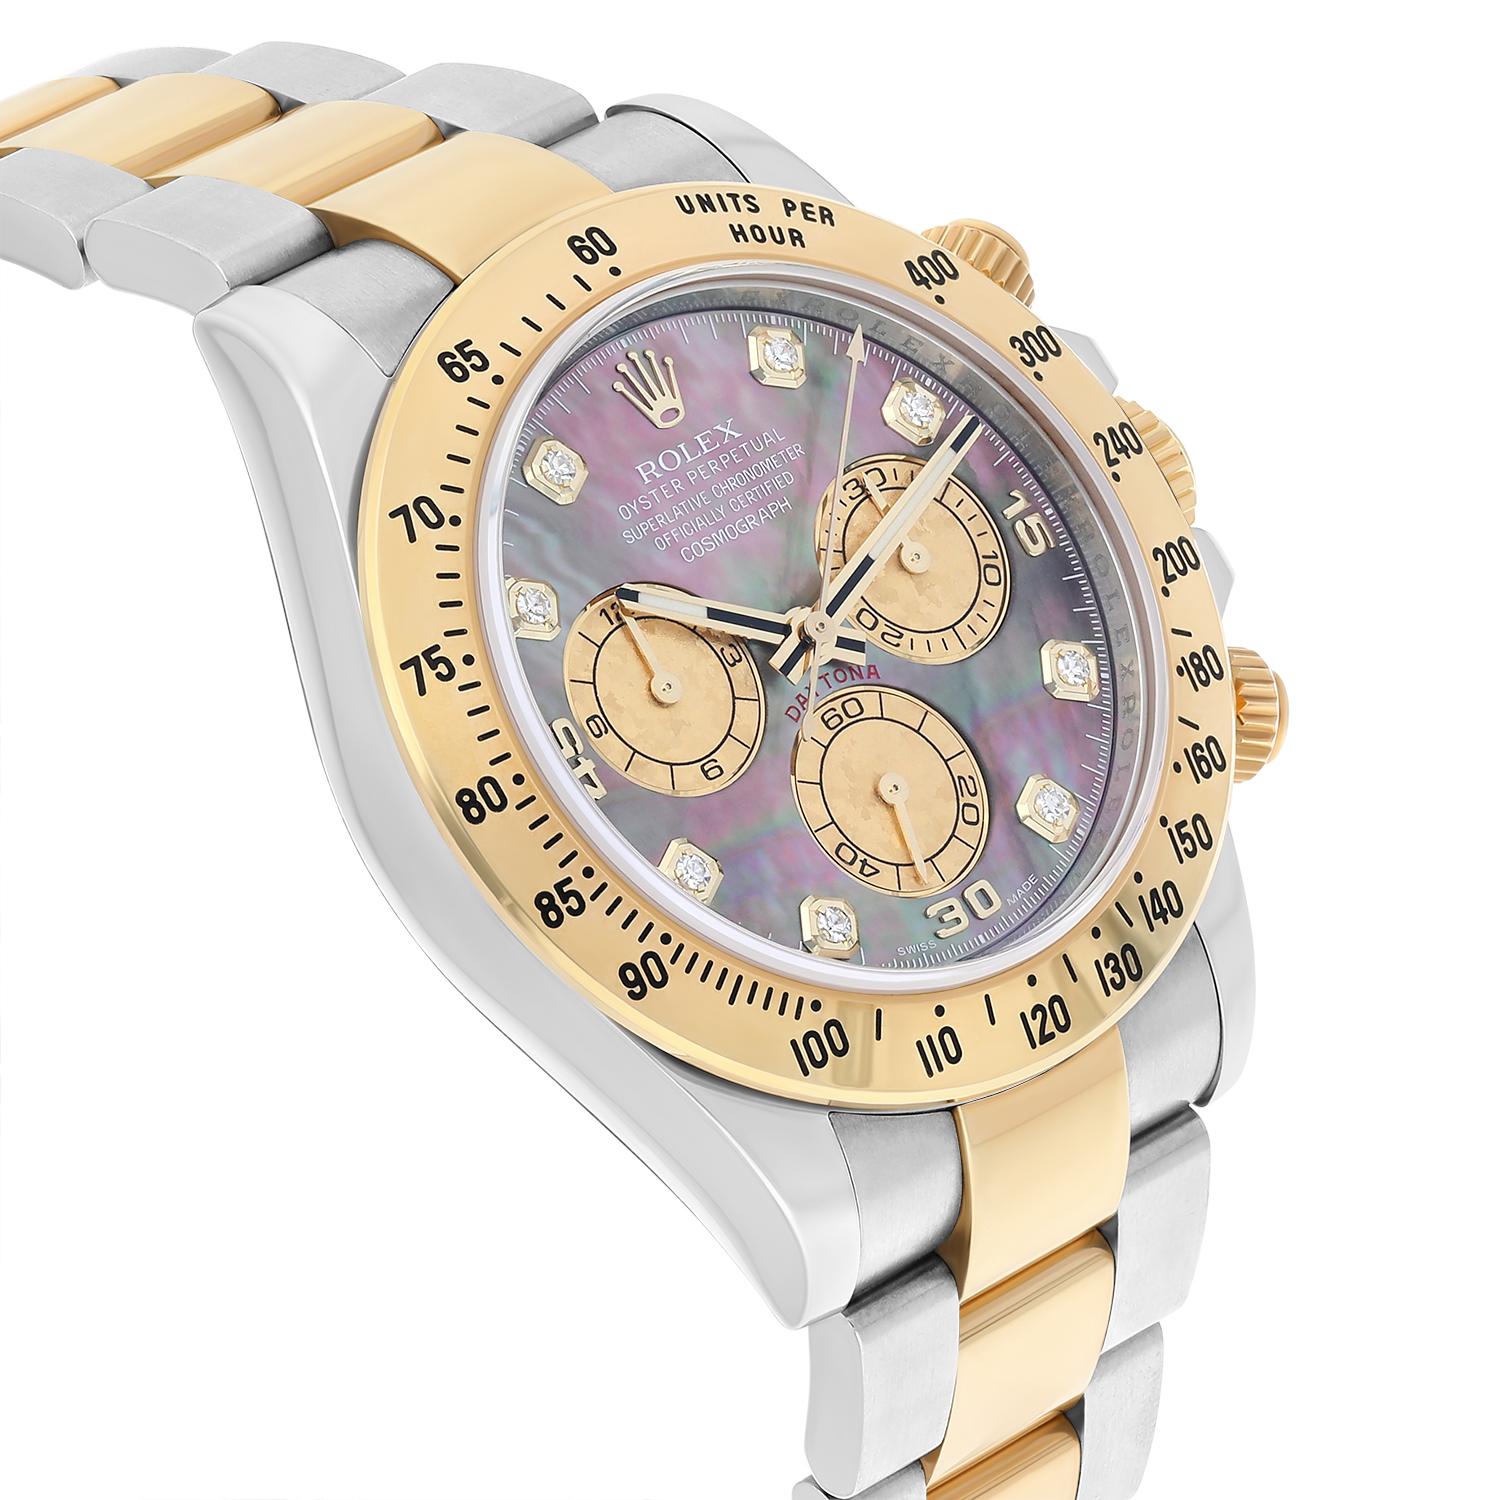 Rolex Daytona Yellow Gold & Steel Black Mother Of Pearl Diamond Dial 116523 B/P In Excellent Condition For Sale In New York, NY